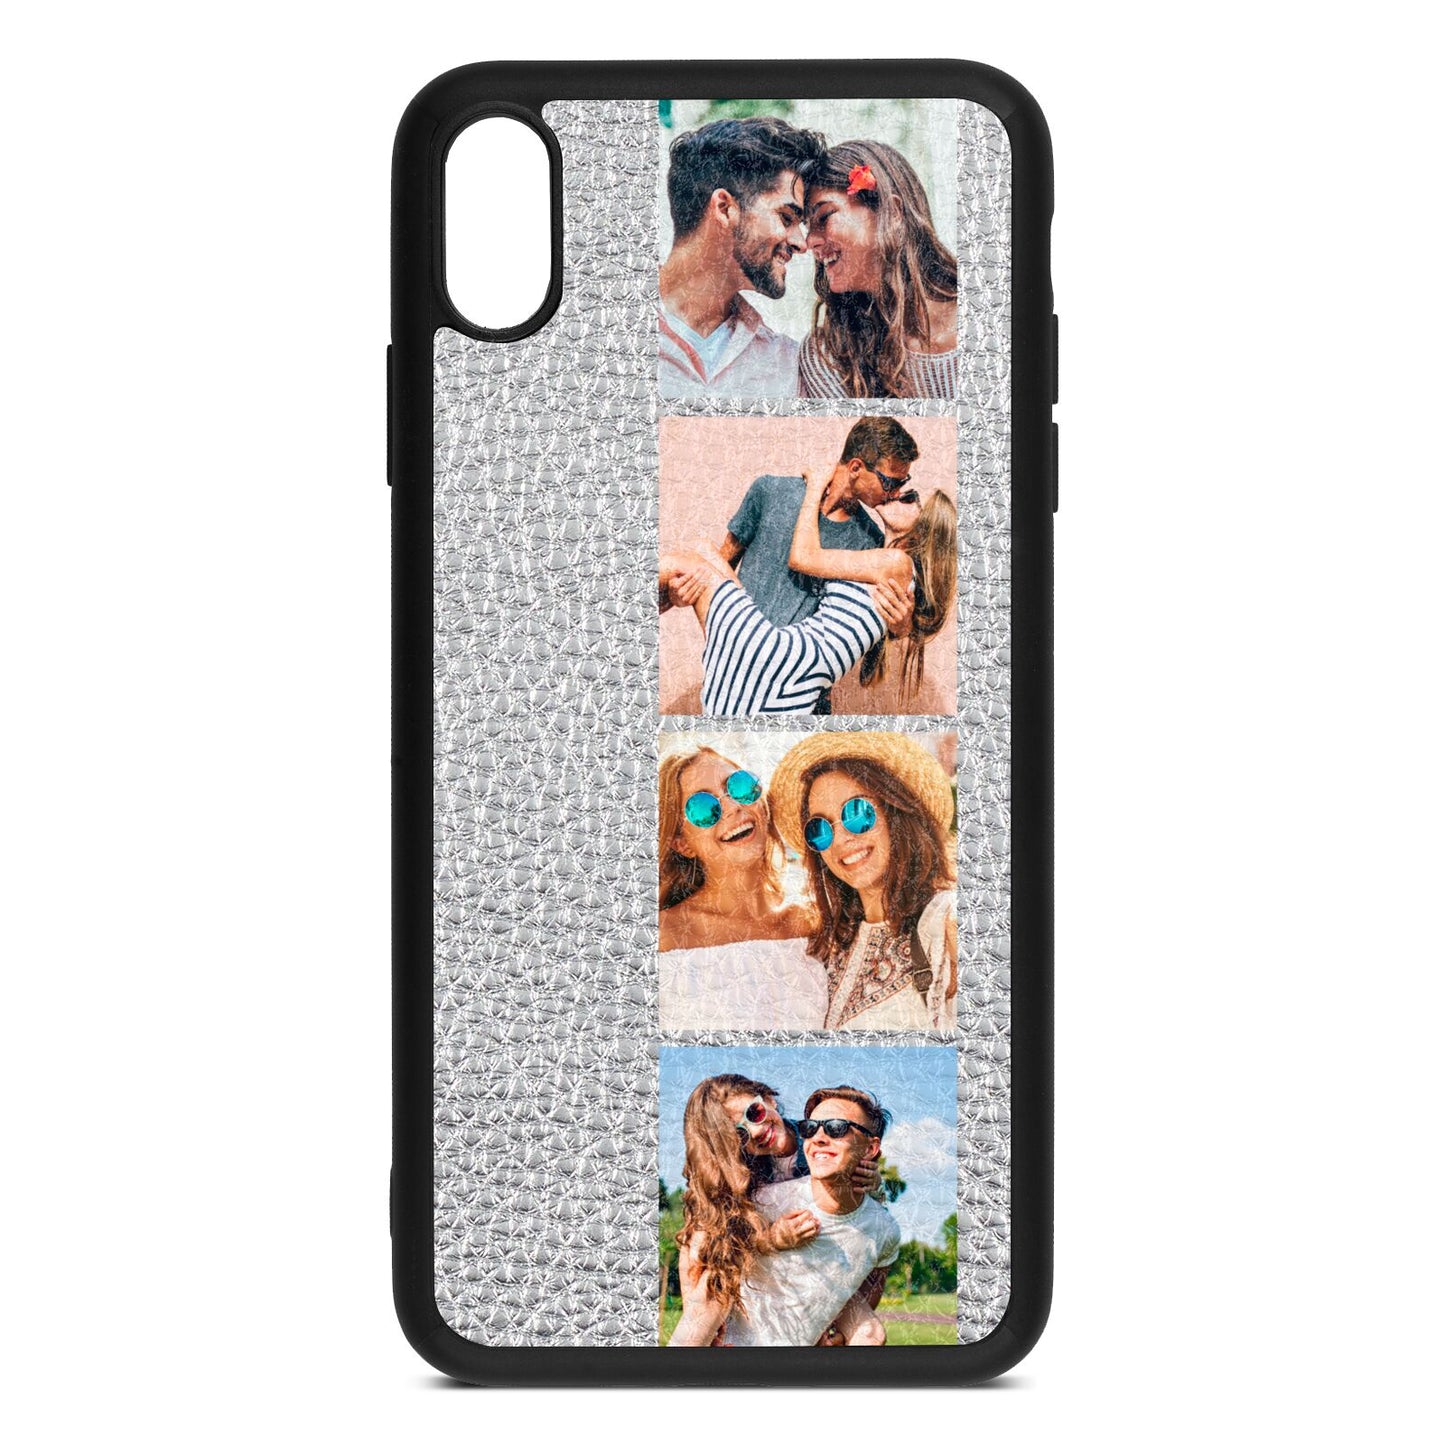 Photo Strip Montage Upload Silver Pebble Leather iPhone Xs Max Case